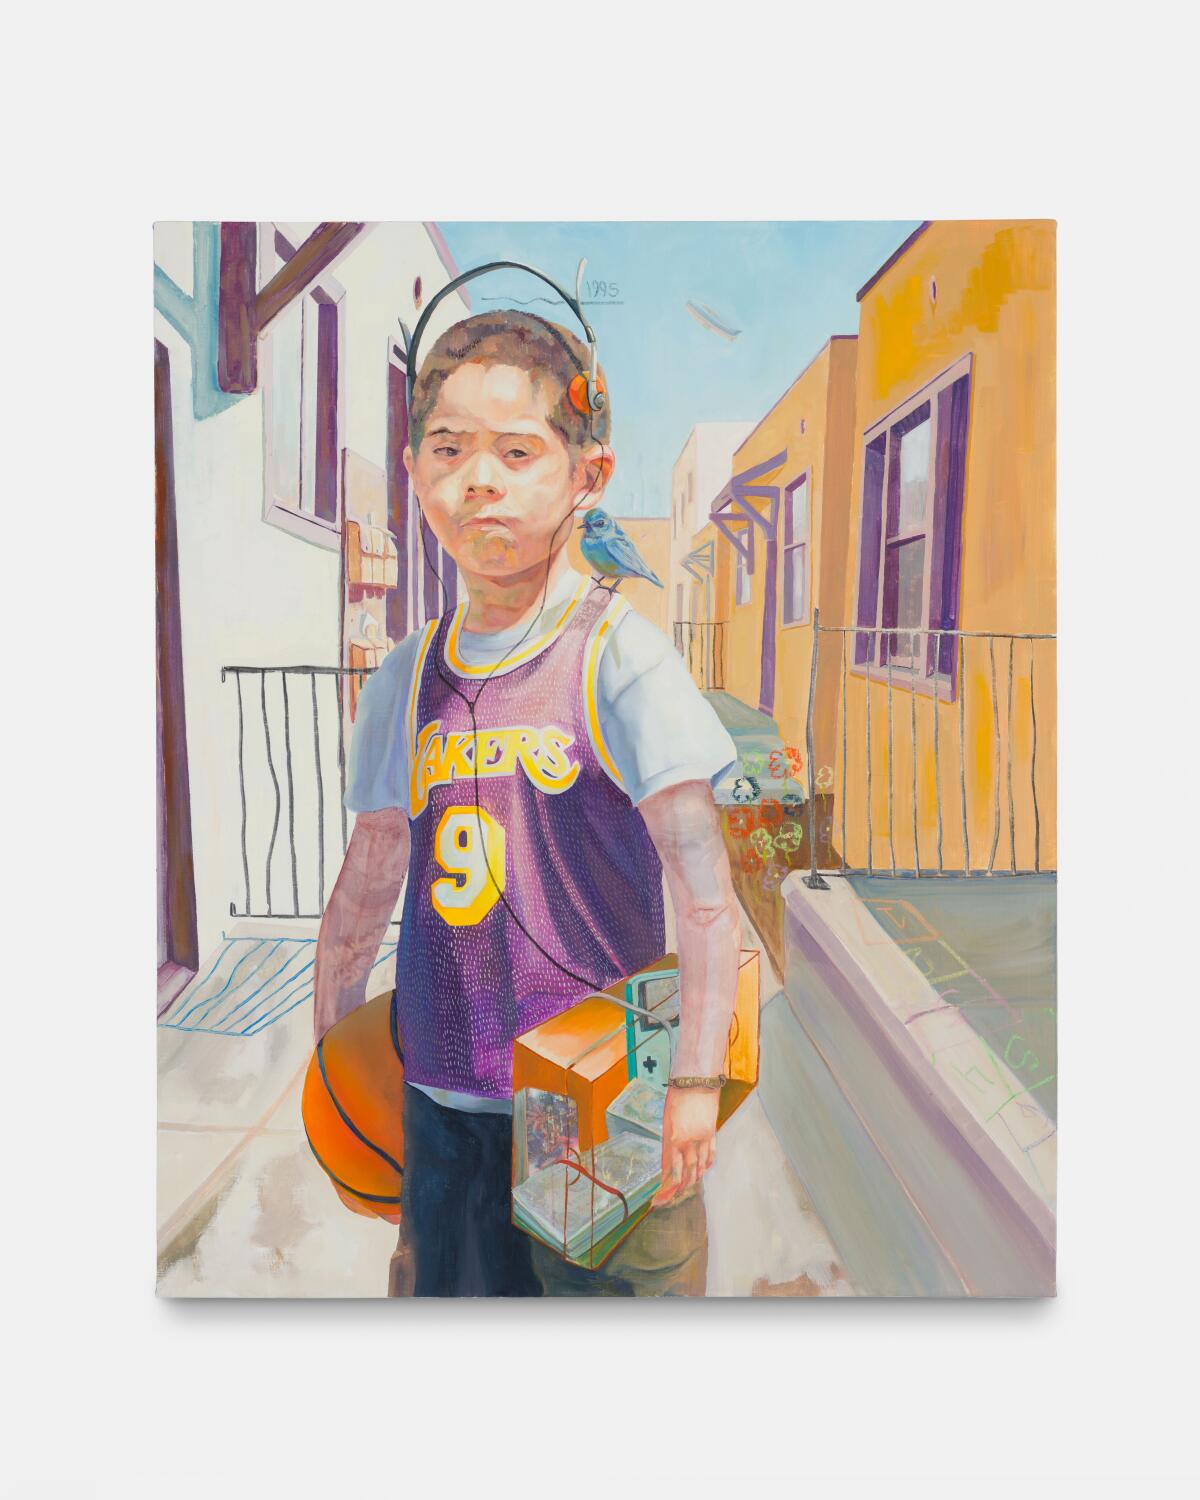 A painting of a boy in a Lakers jersey, standing on the street between houses. 